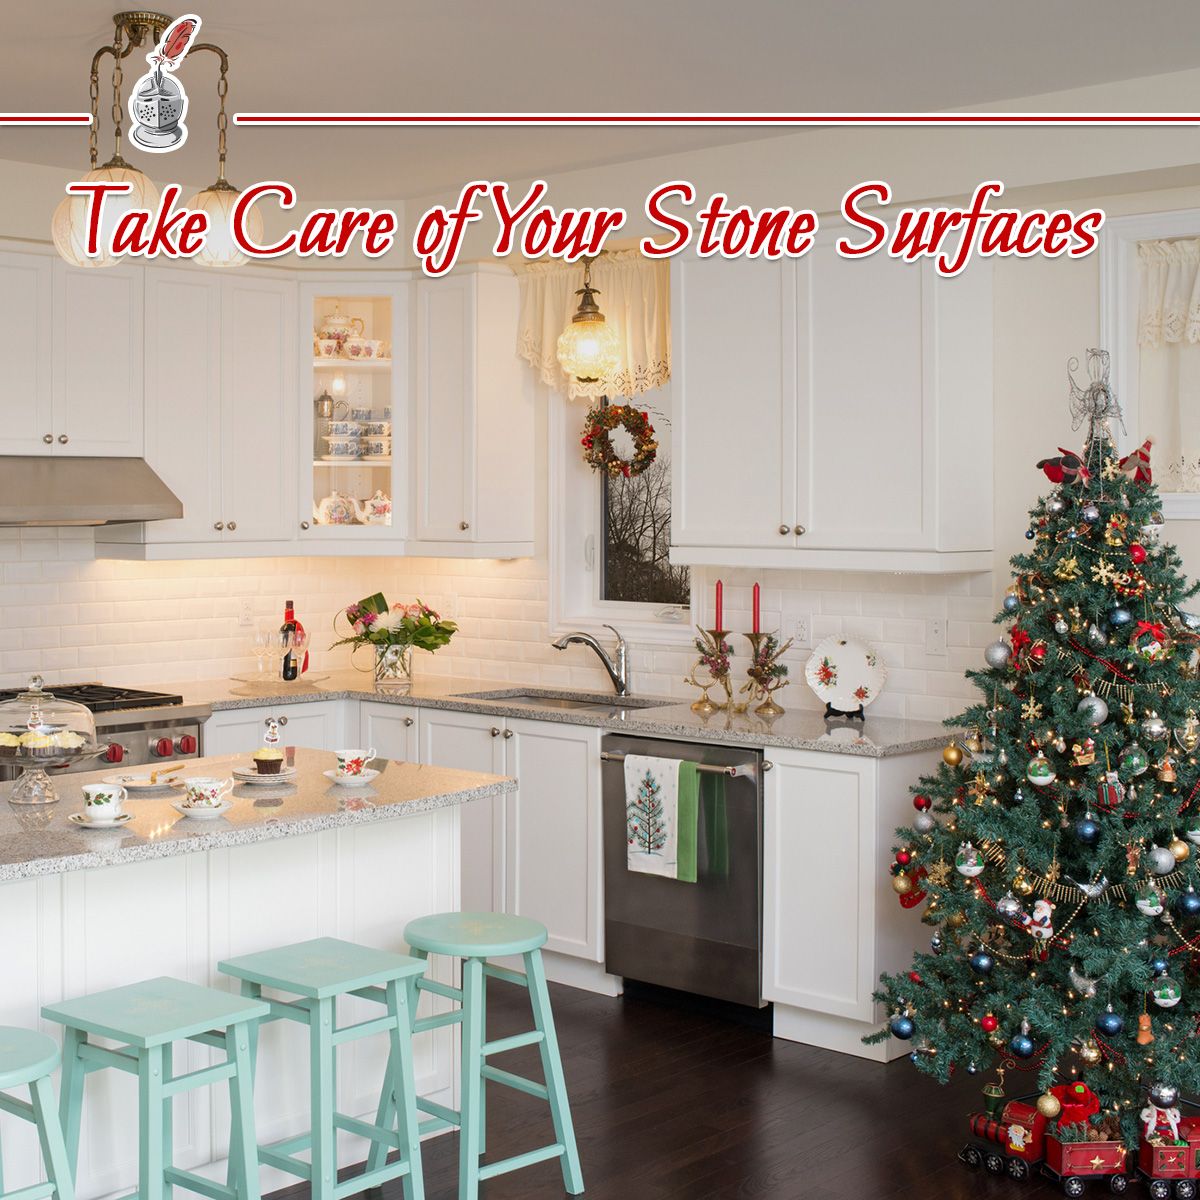 Take Care of Your Stone Surfaces